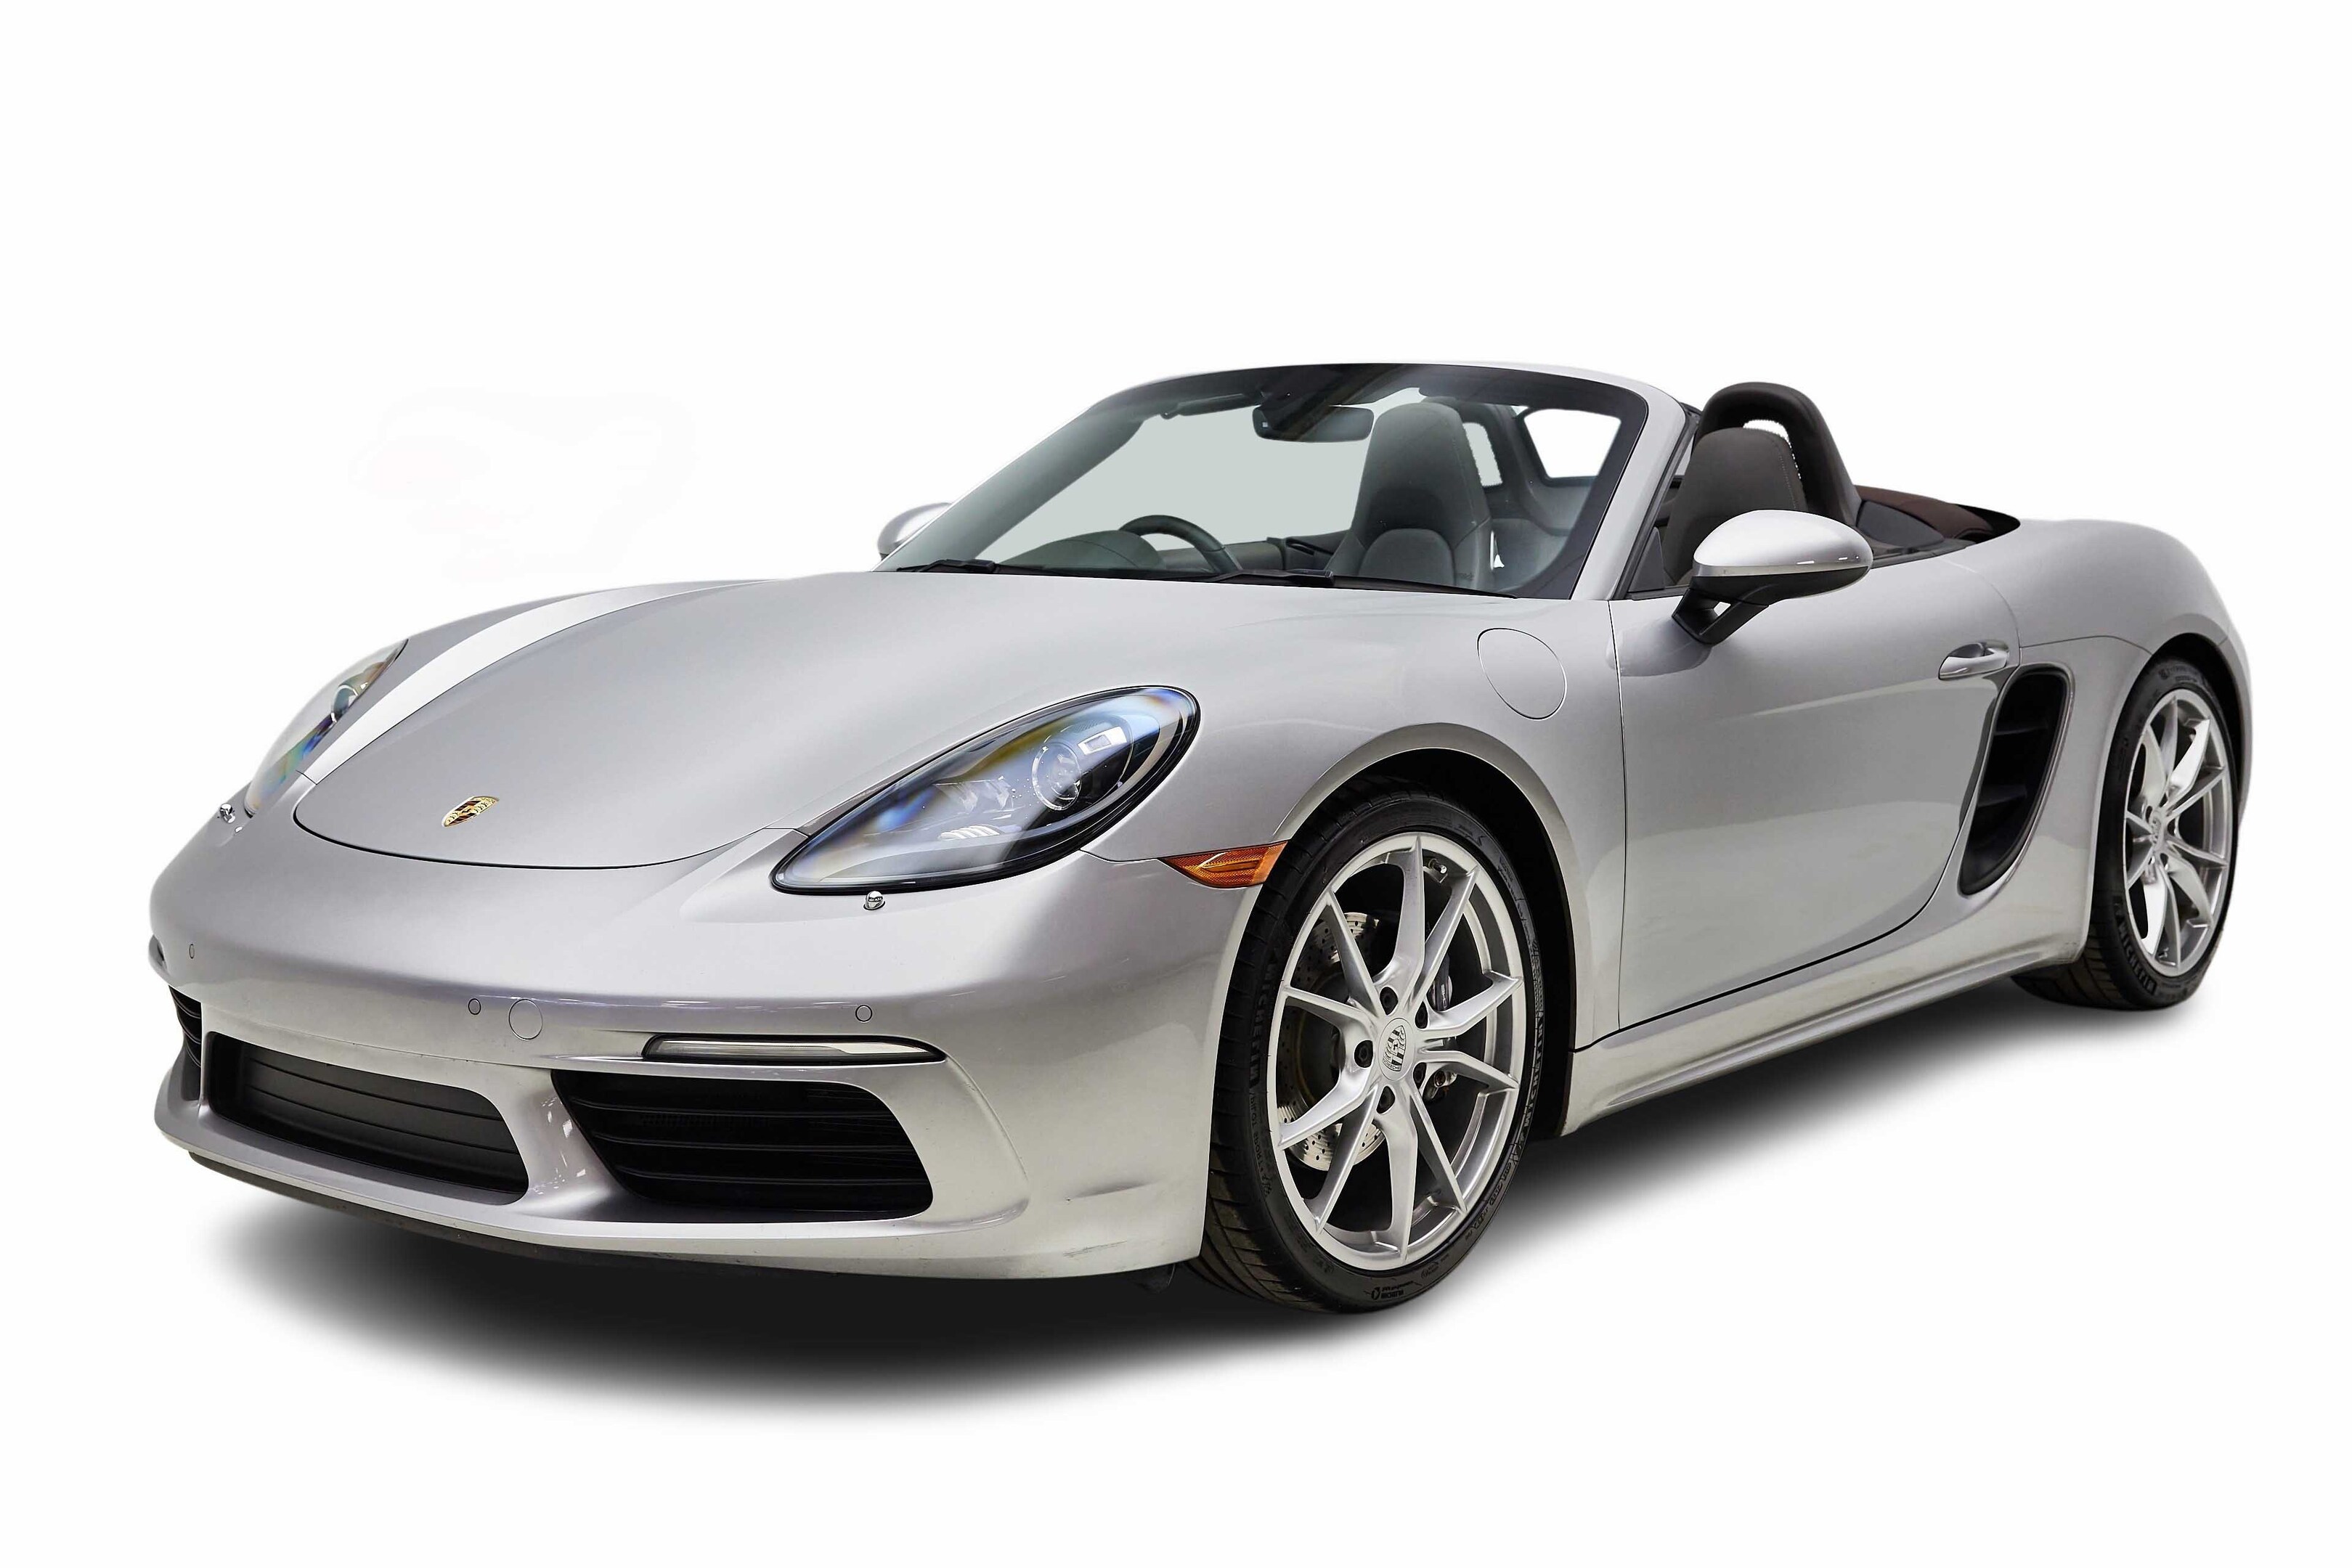 2017 Porsche 718 Boxster RESERVED 2dr Roadster, 6 spd manual